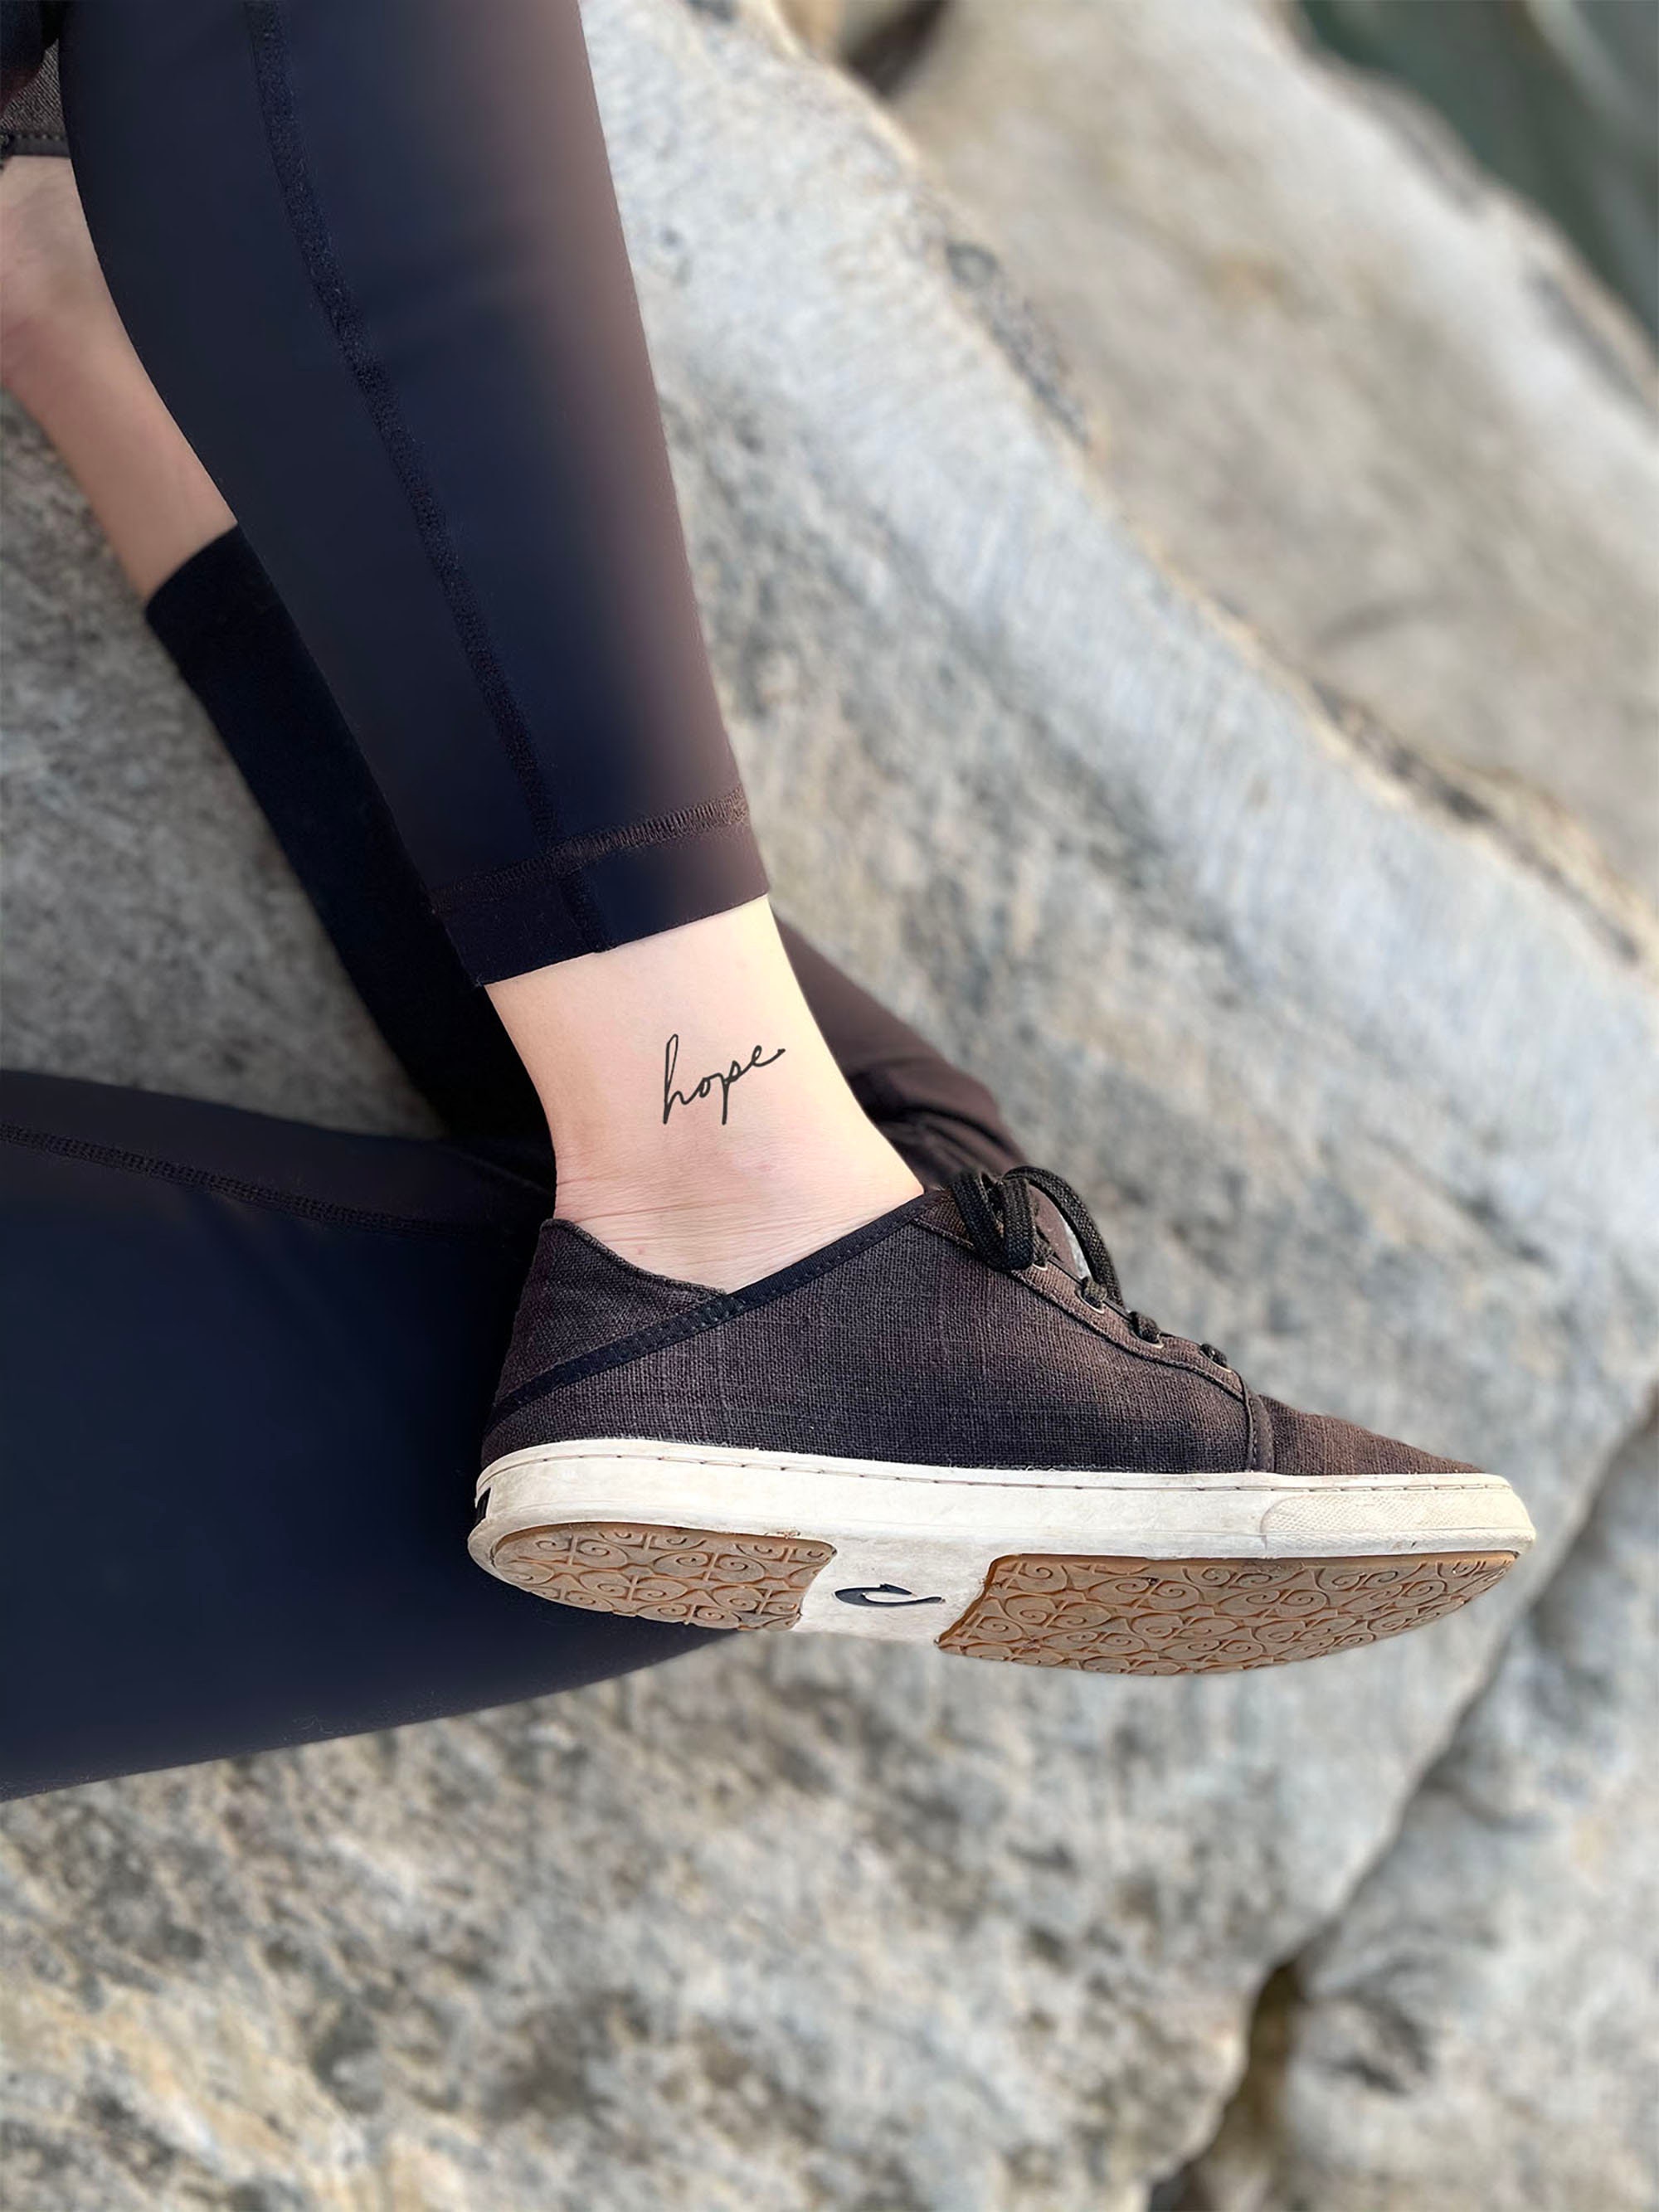 Share 170+ ankle tattoo writing best